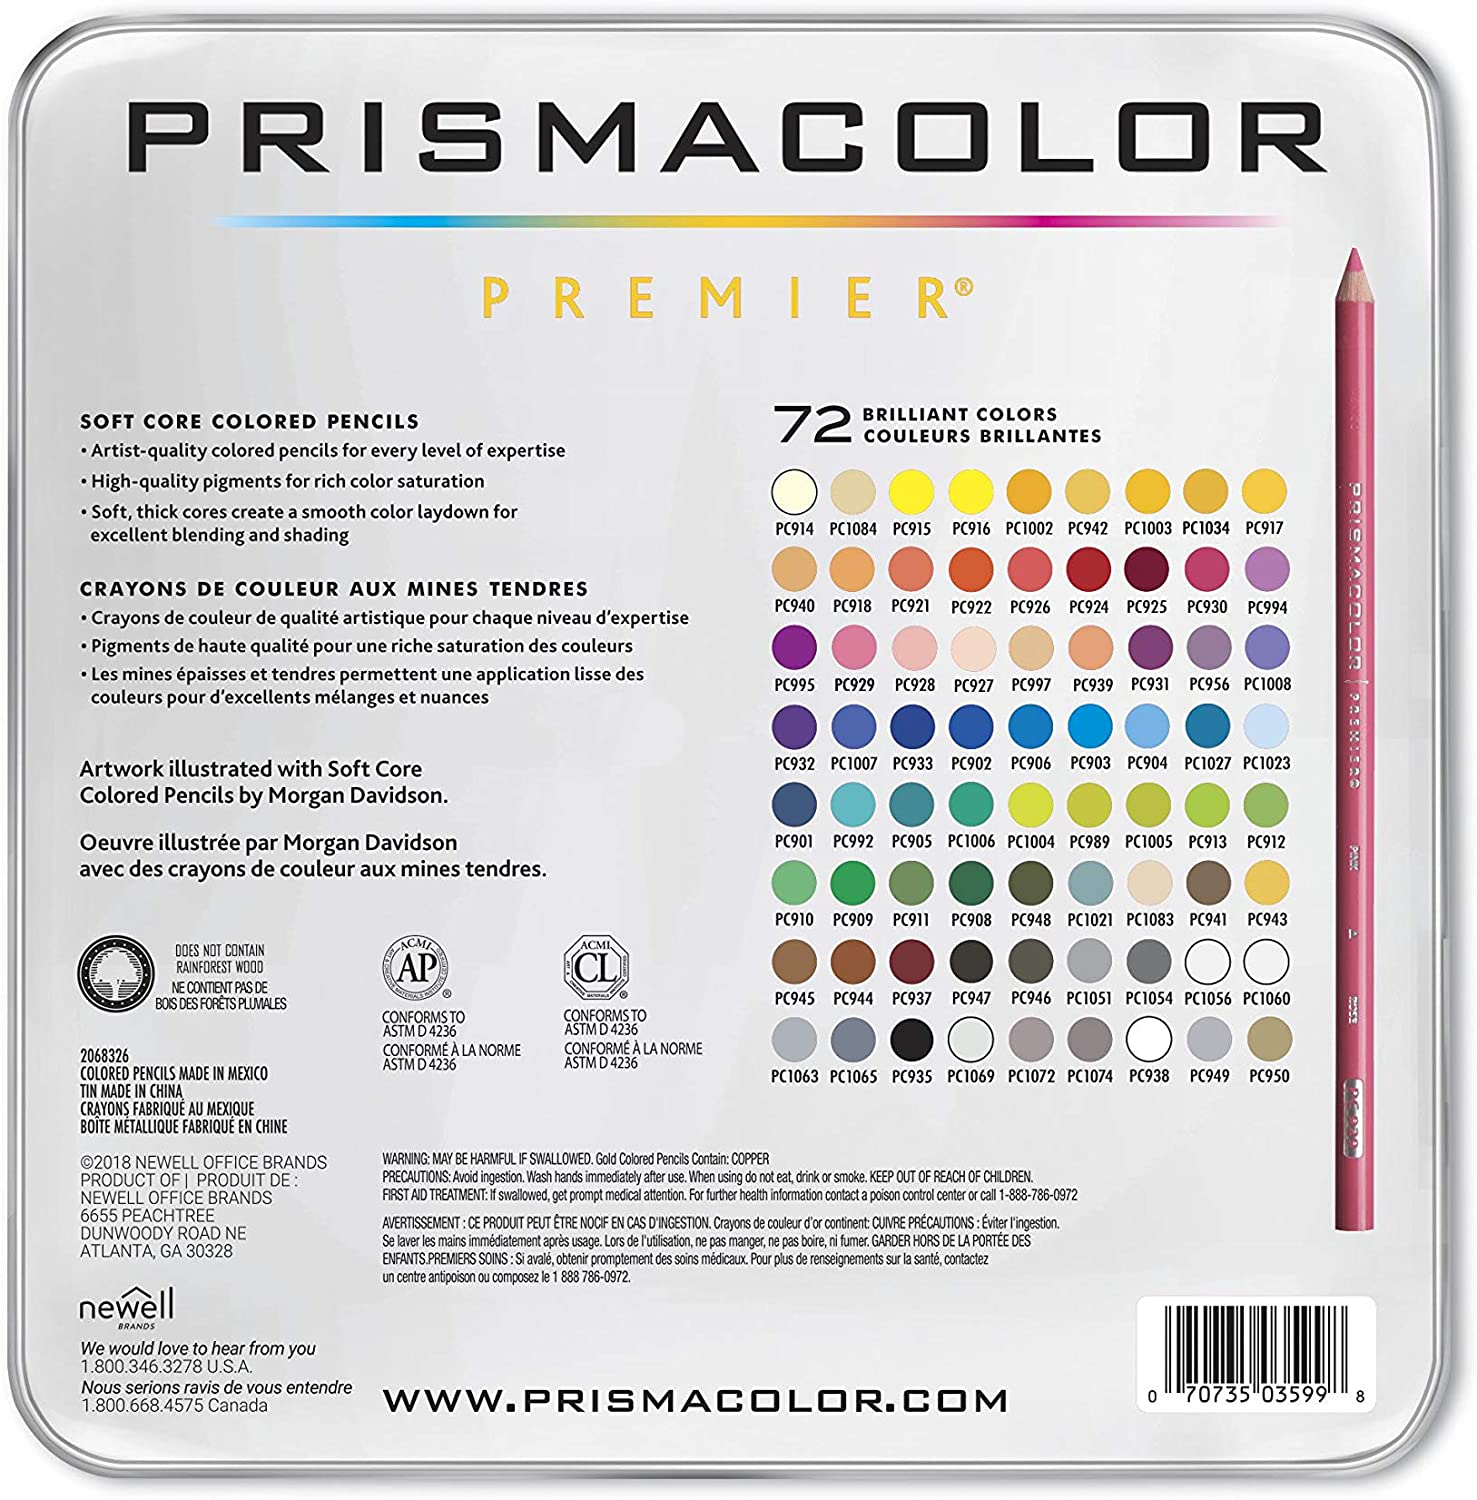 Ohuhu Alcohol Art Markers Dual Tip Pack of [48-320]